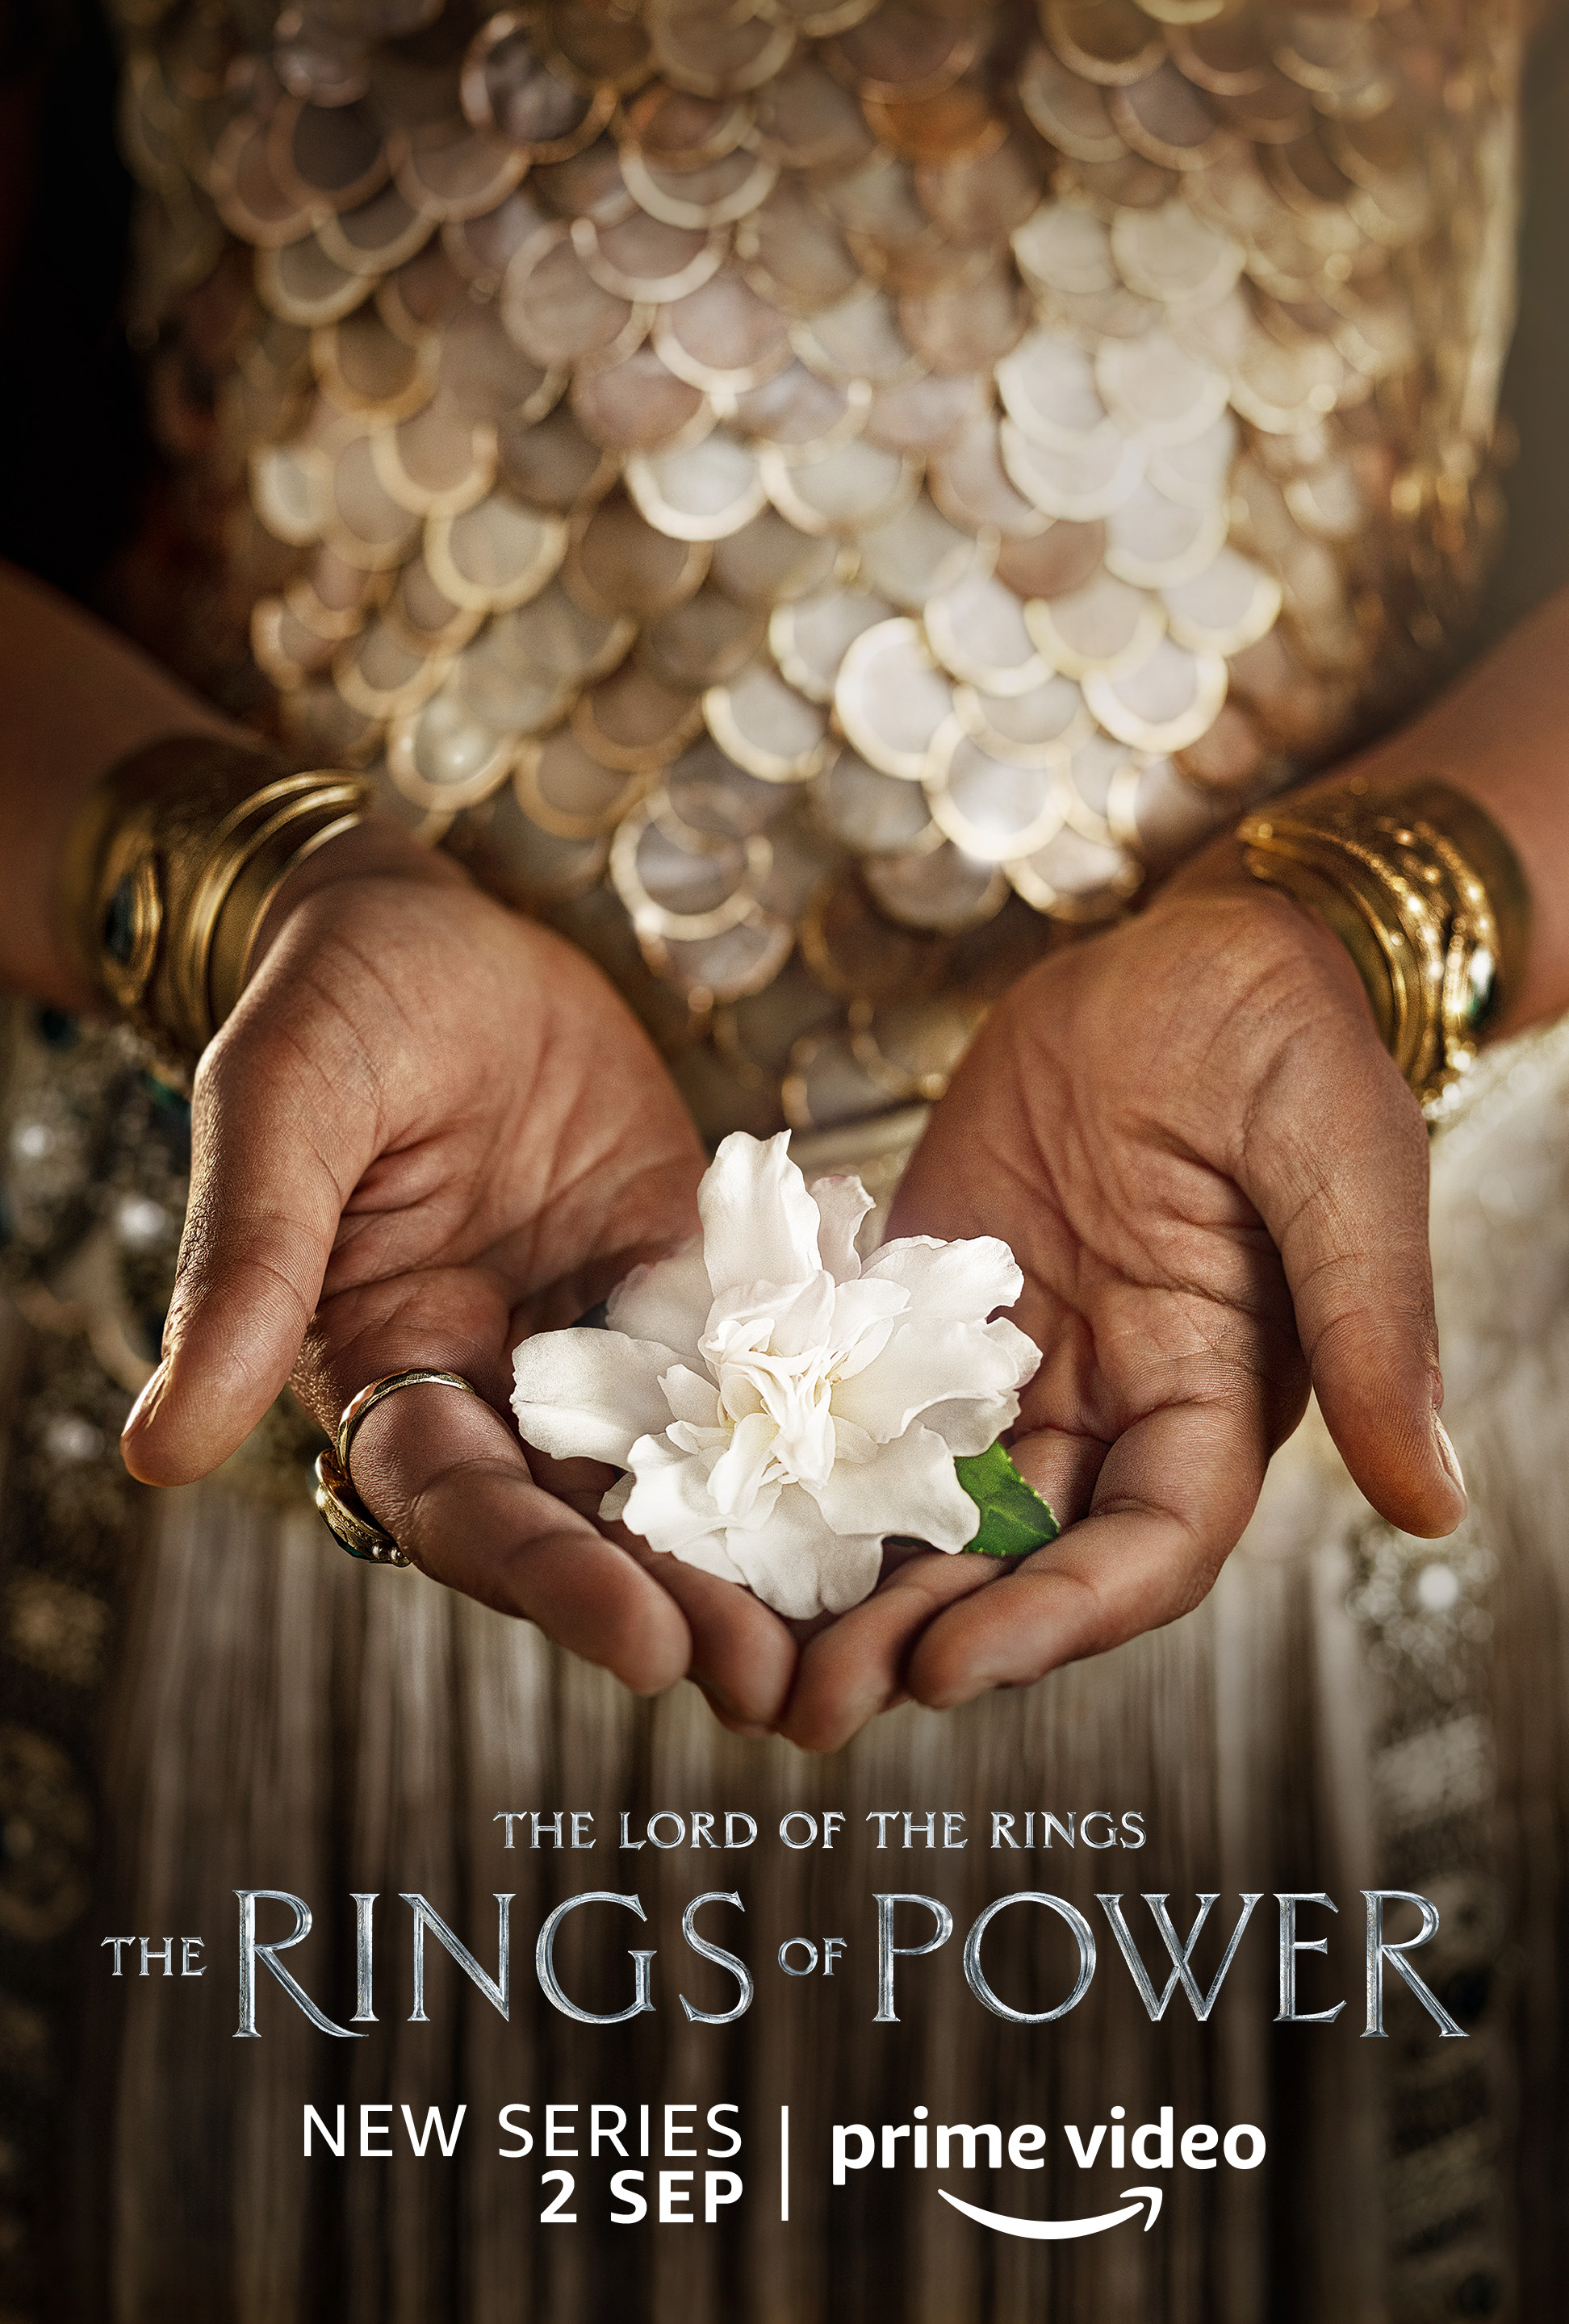 A female holding a flower character poster for Lord of the Rings: The Rings of Power